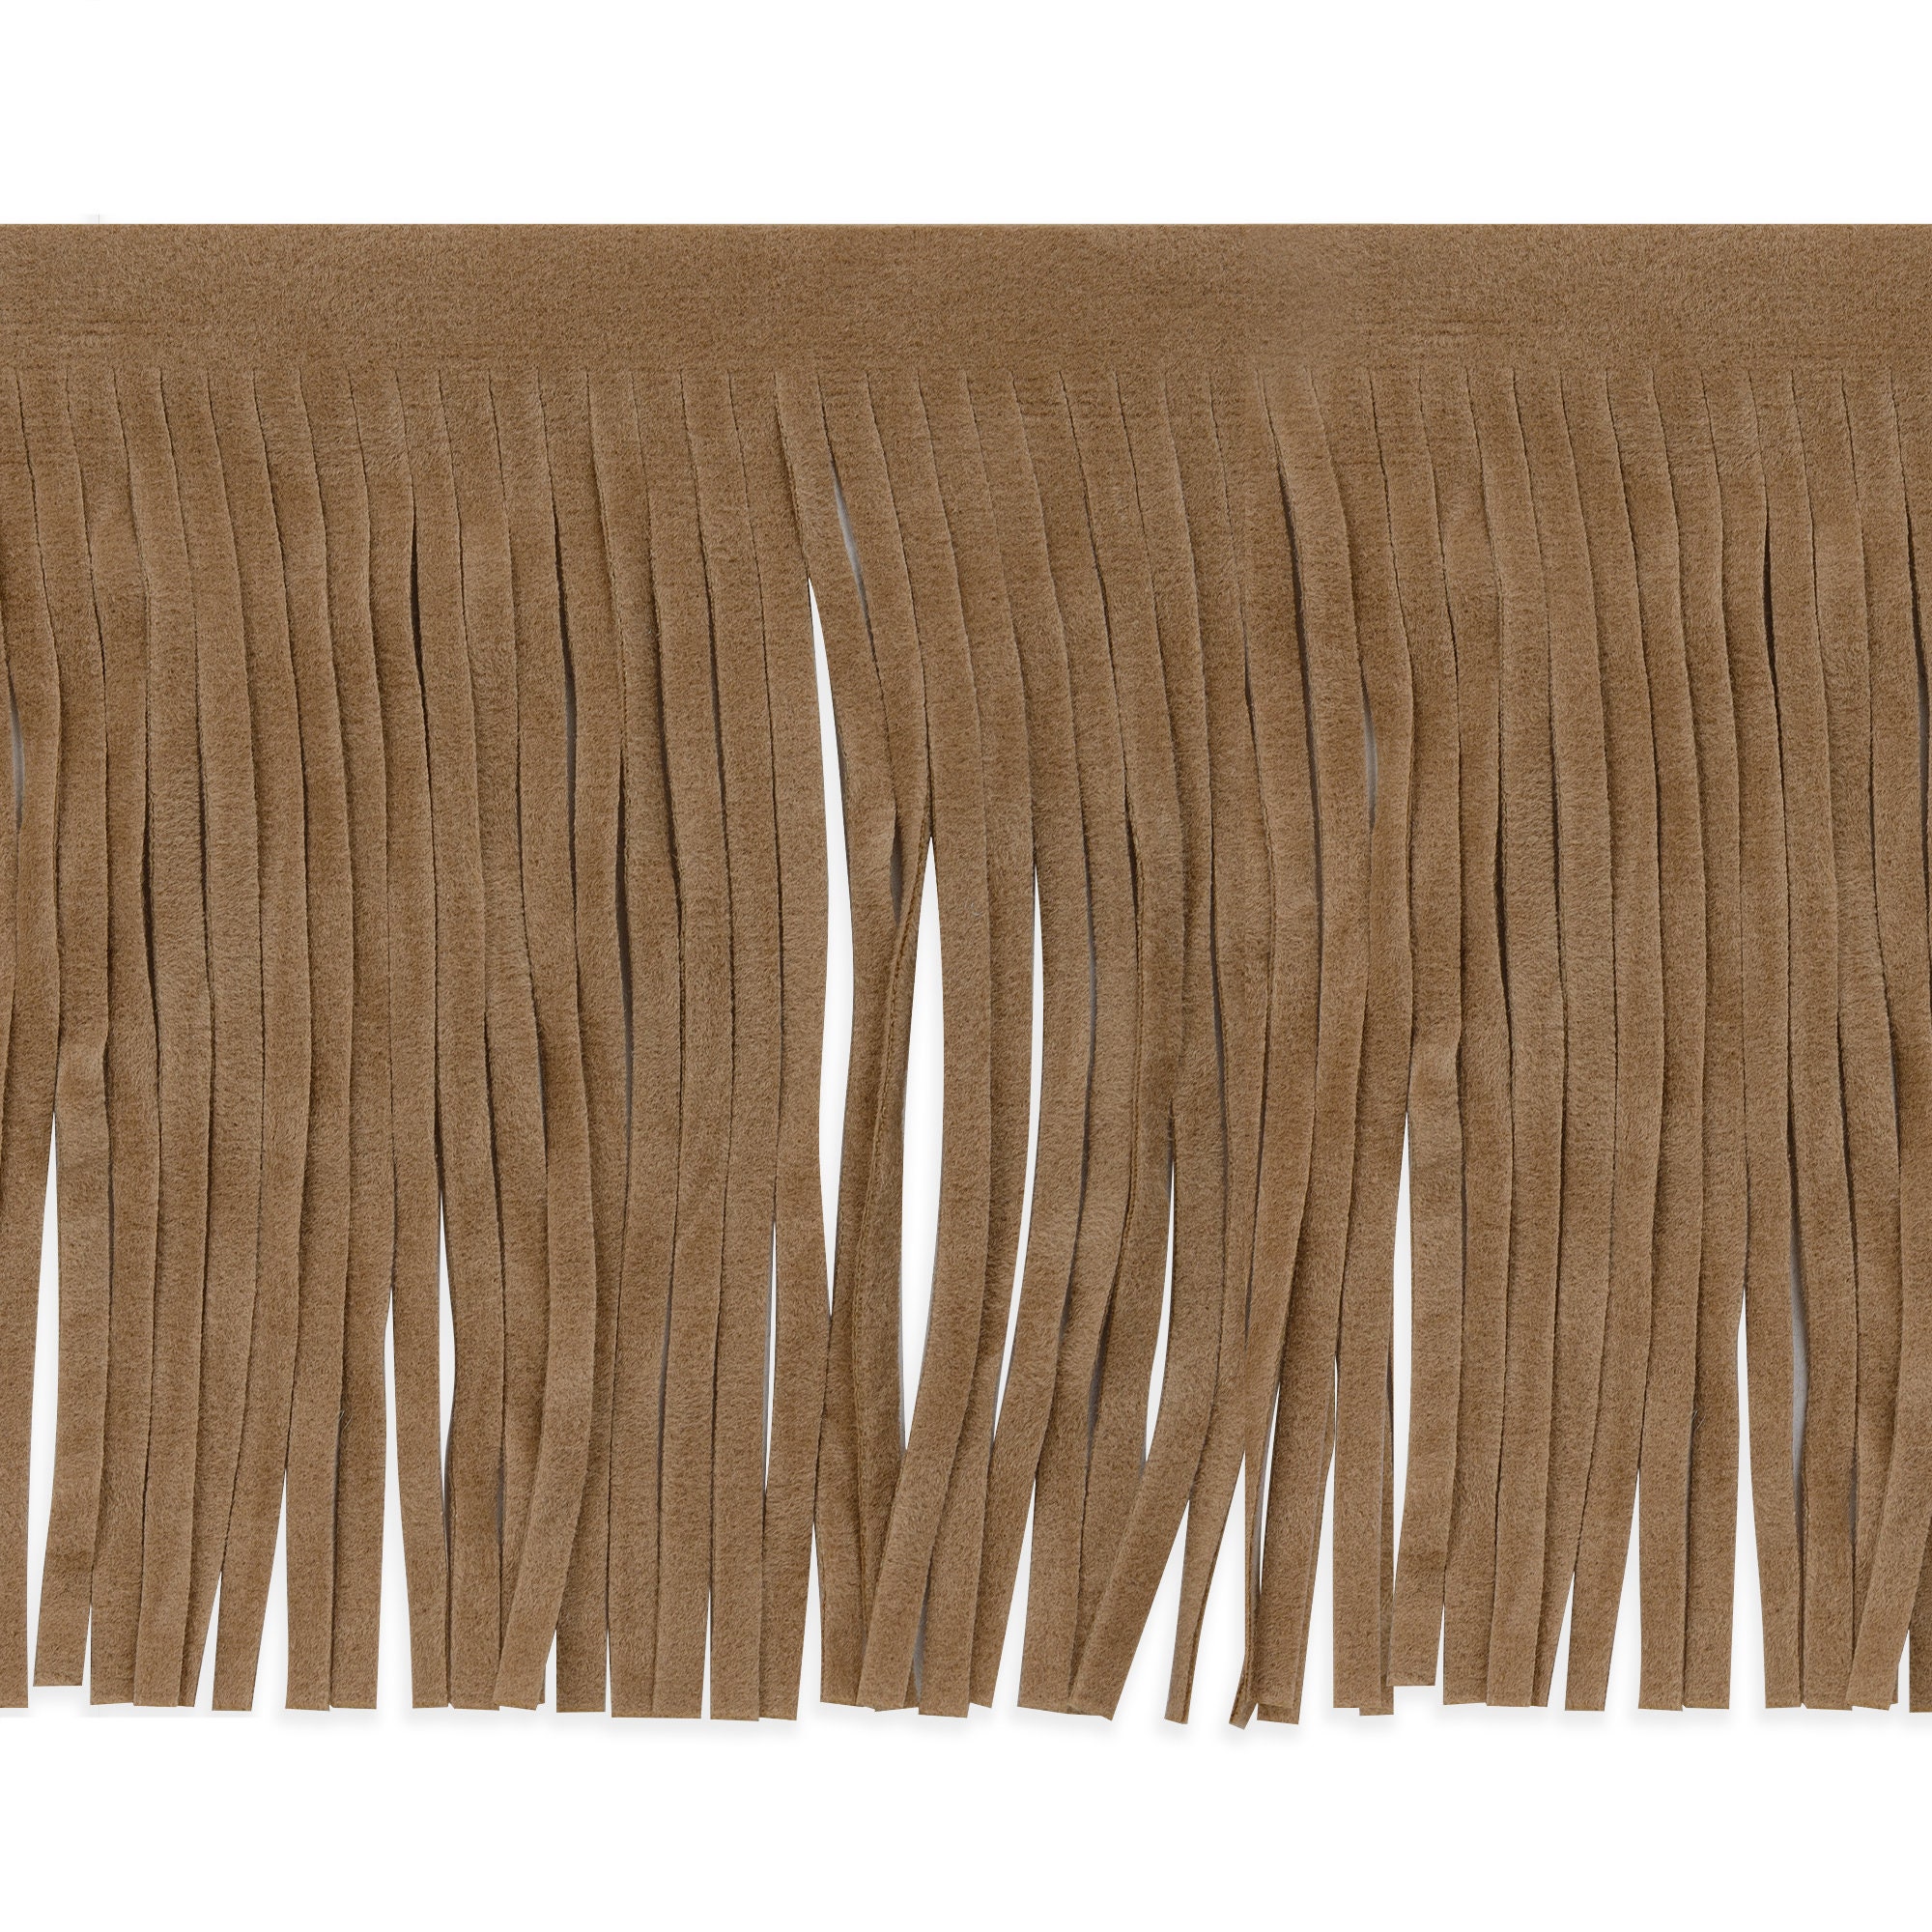 Leather Fringe: Sold by The Foot (4 FT, Silver Metallic)